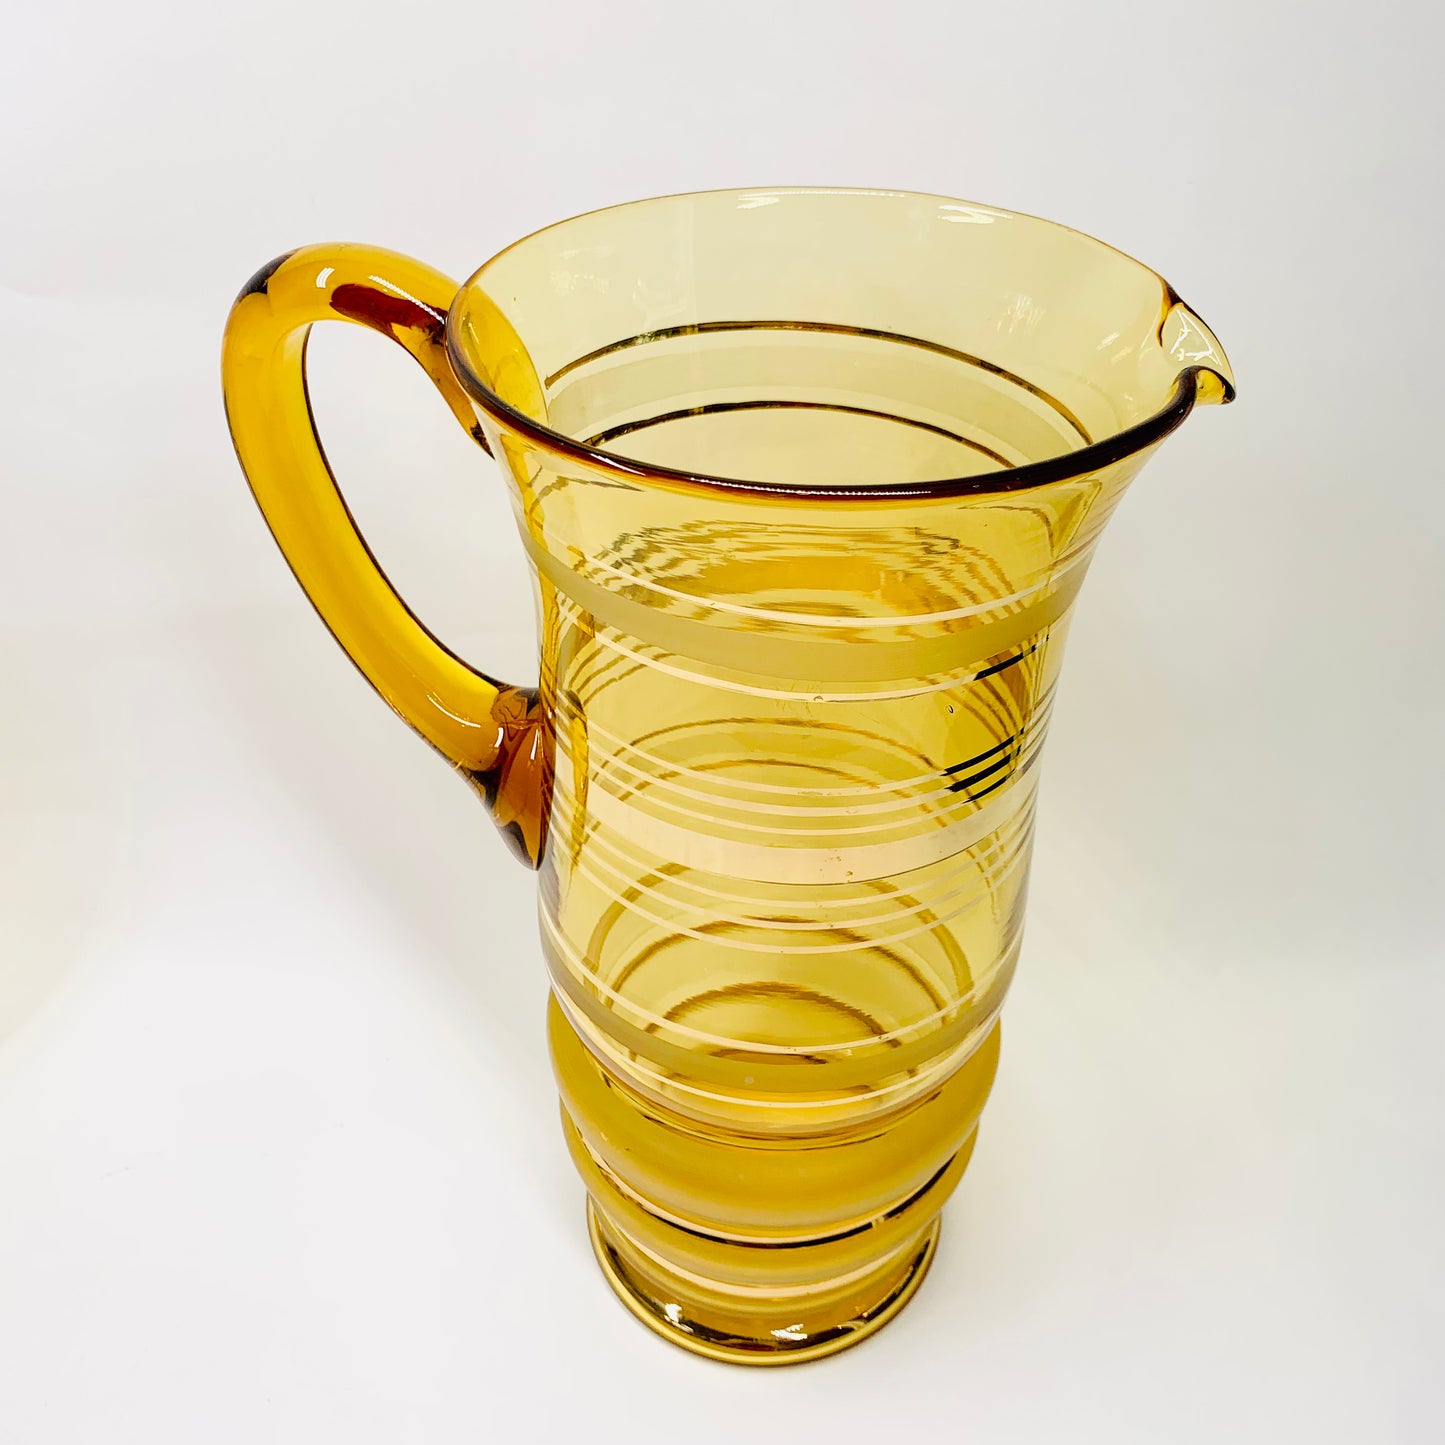 Midcentury gold gilded tall amber glasses and matching water jug/pitcher